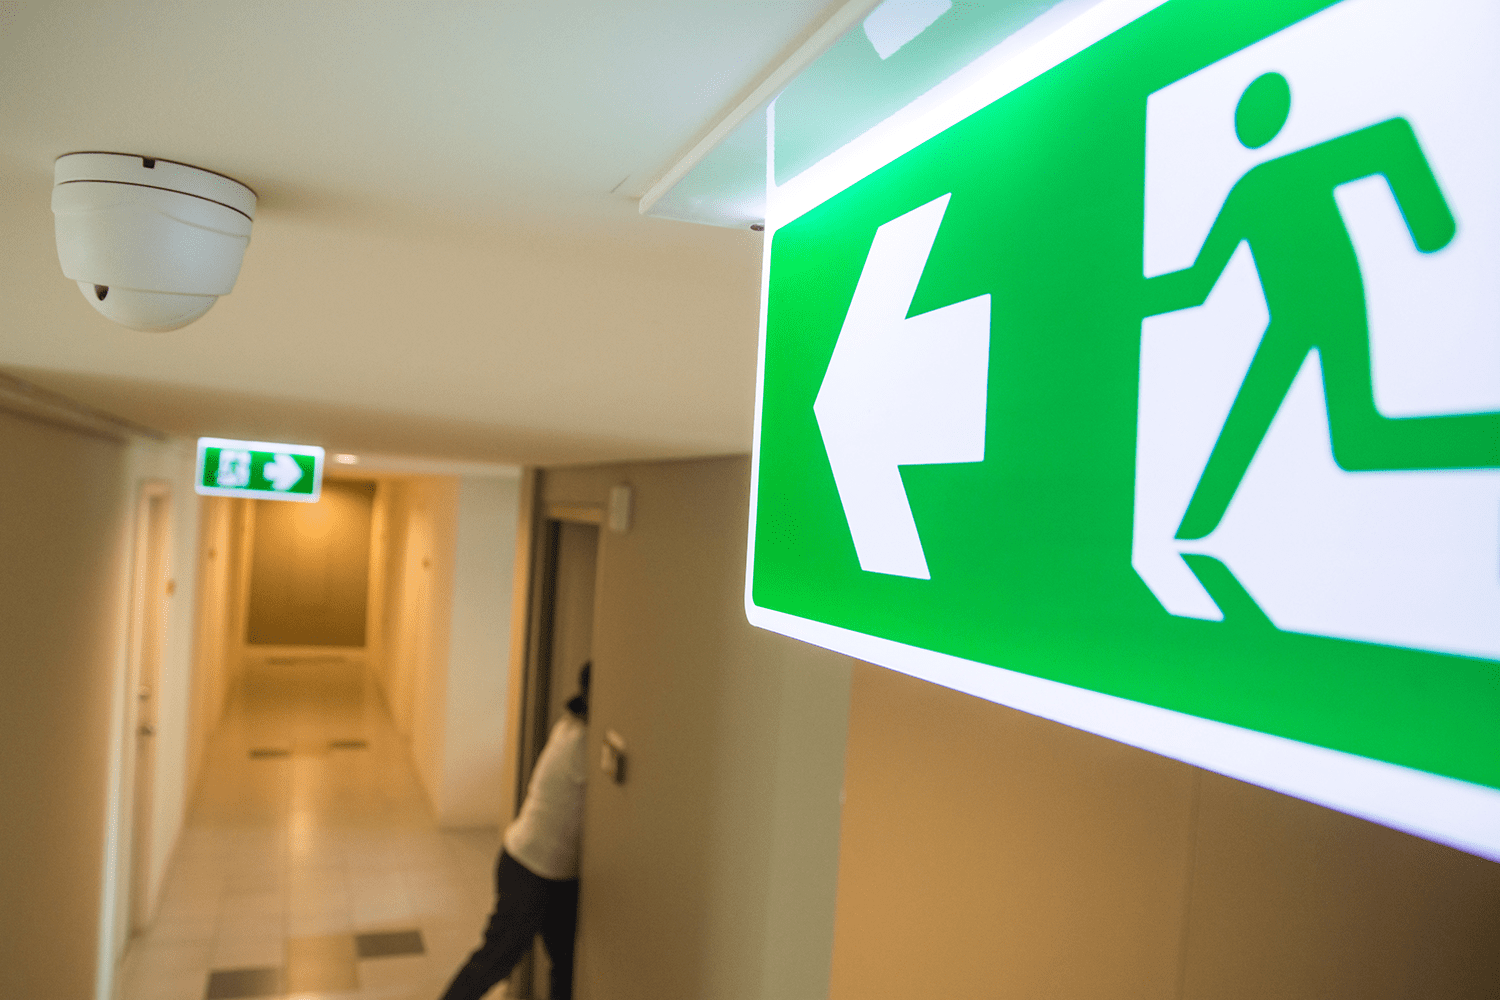 Fire exit signs in a corridor with woman escaping